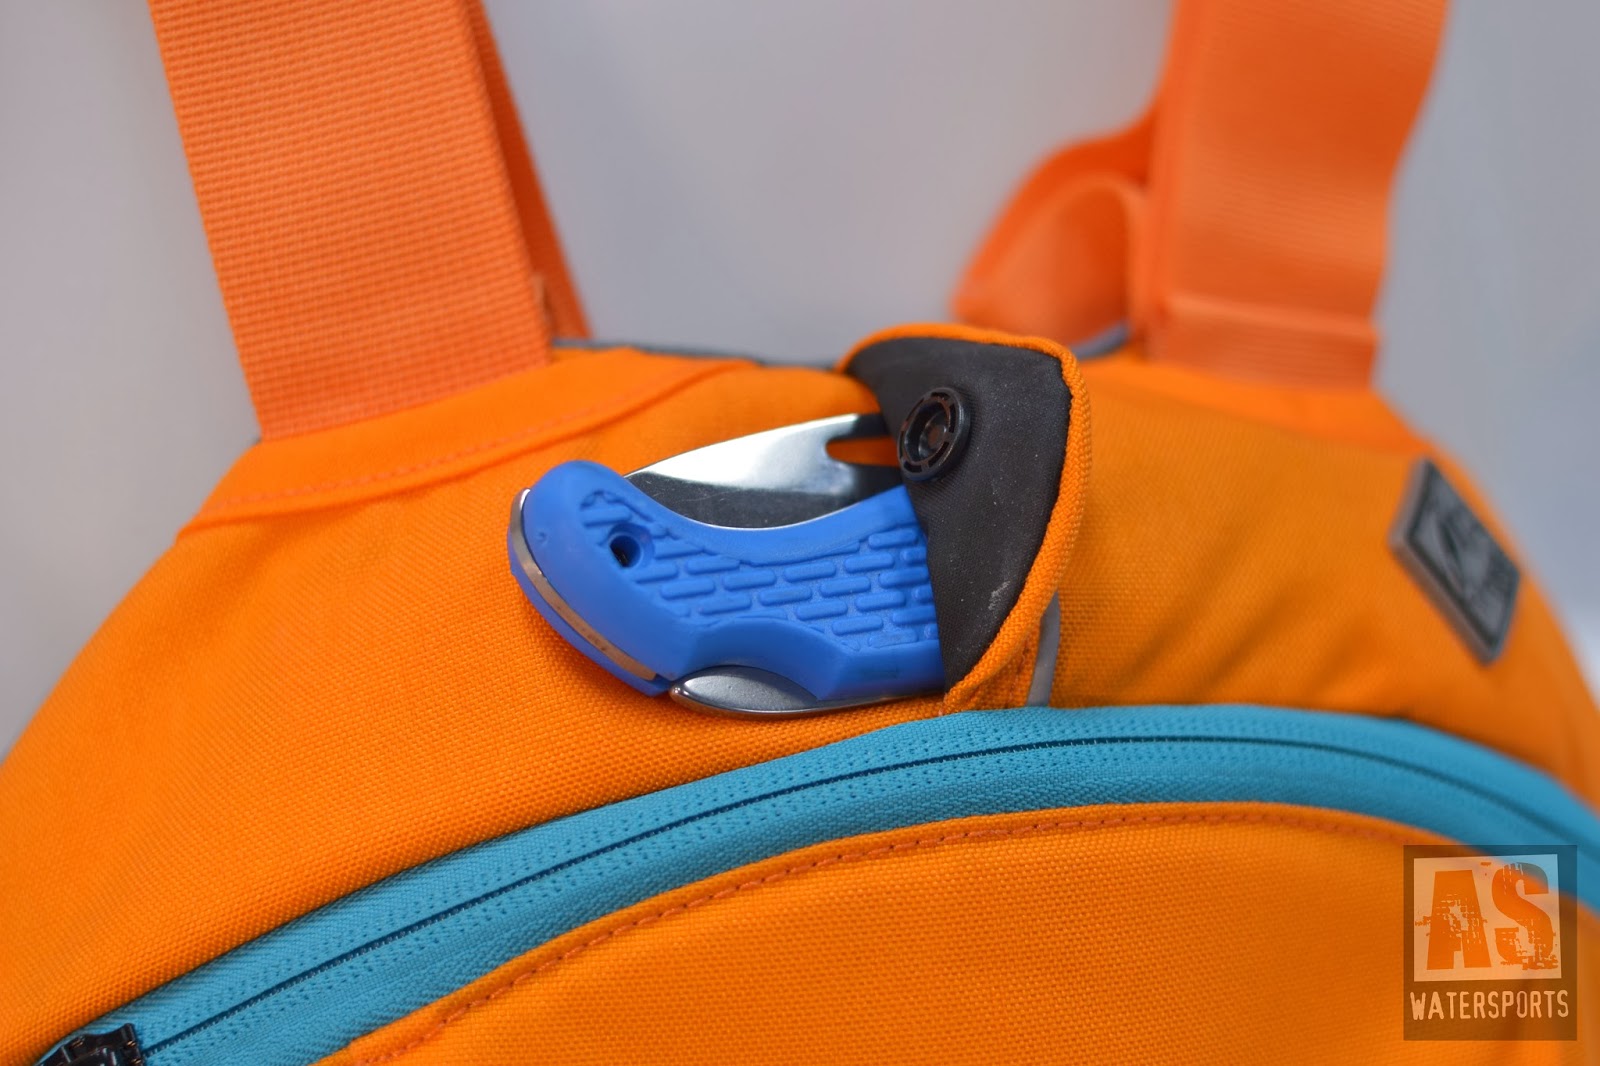 The Palm Fxr has a quick access knife pocket